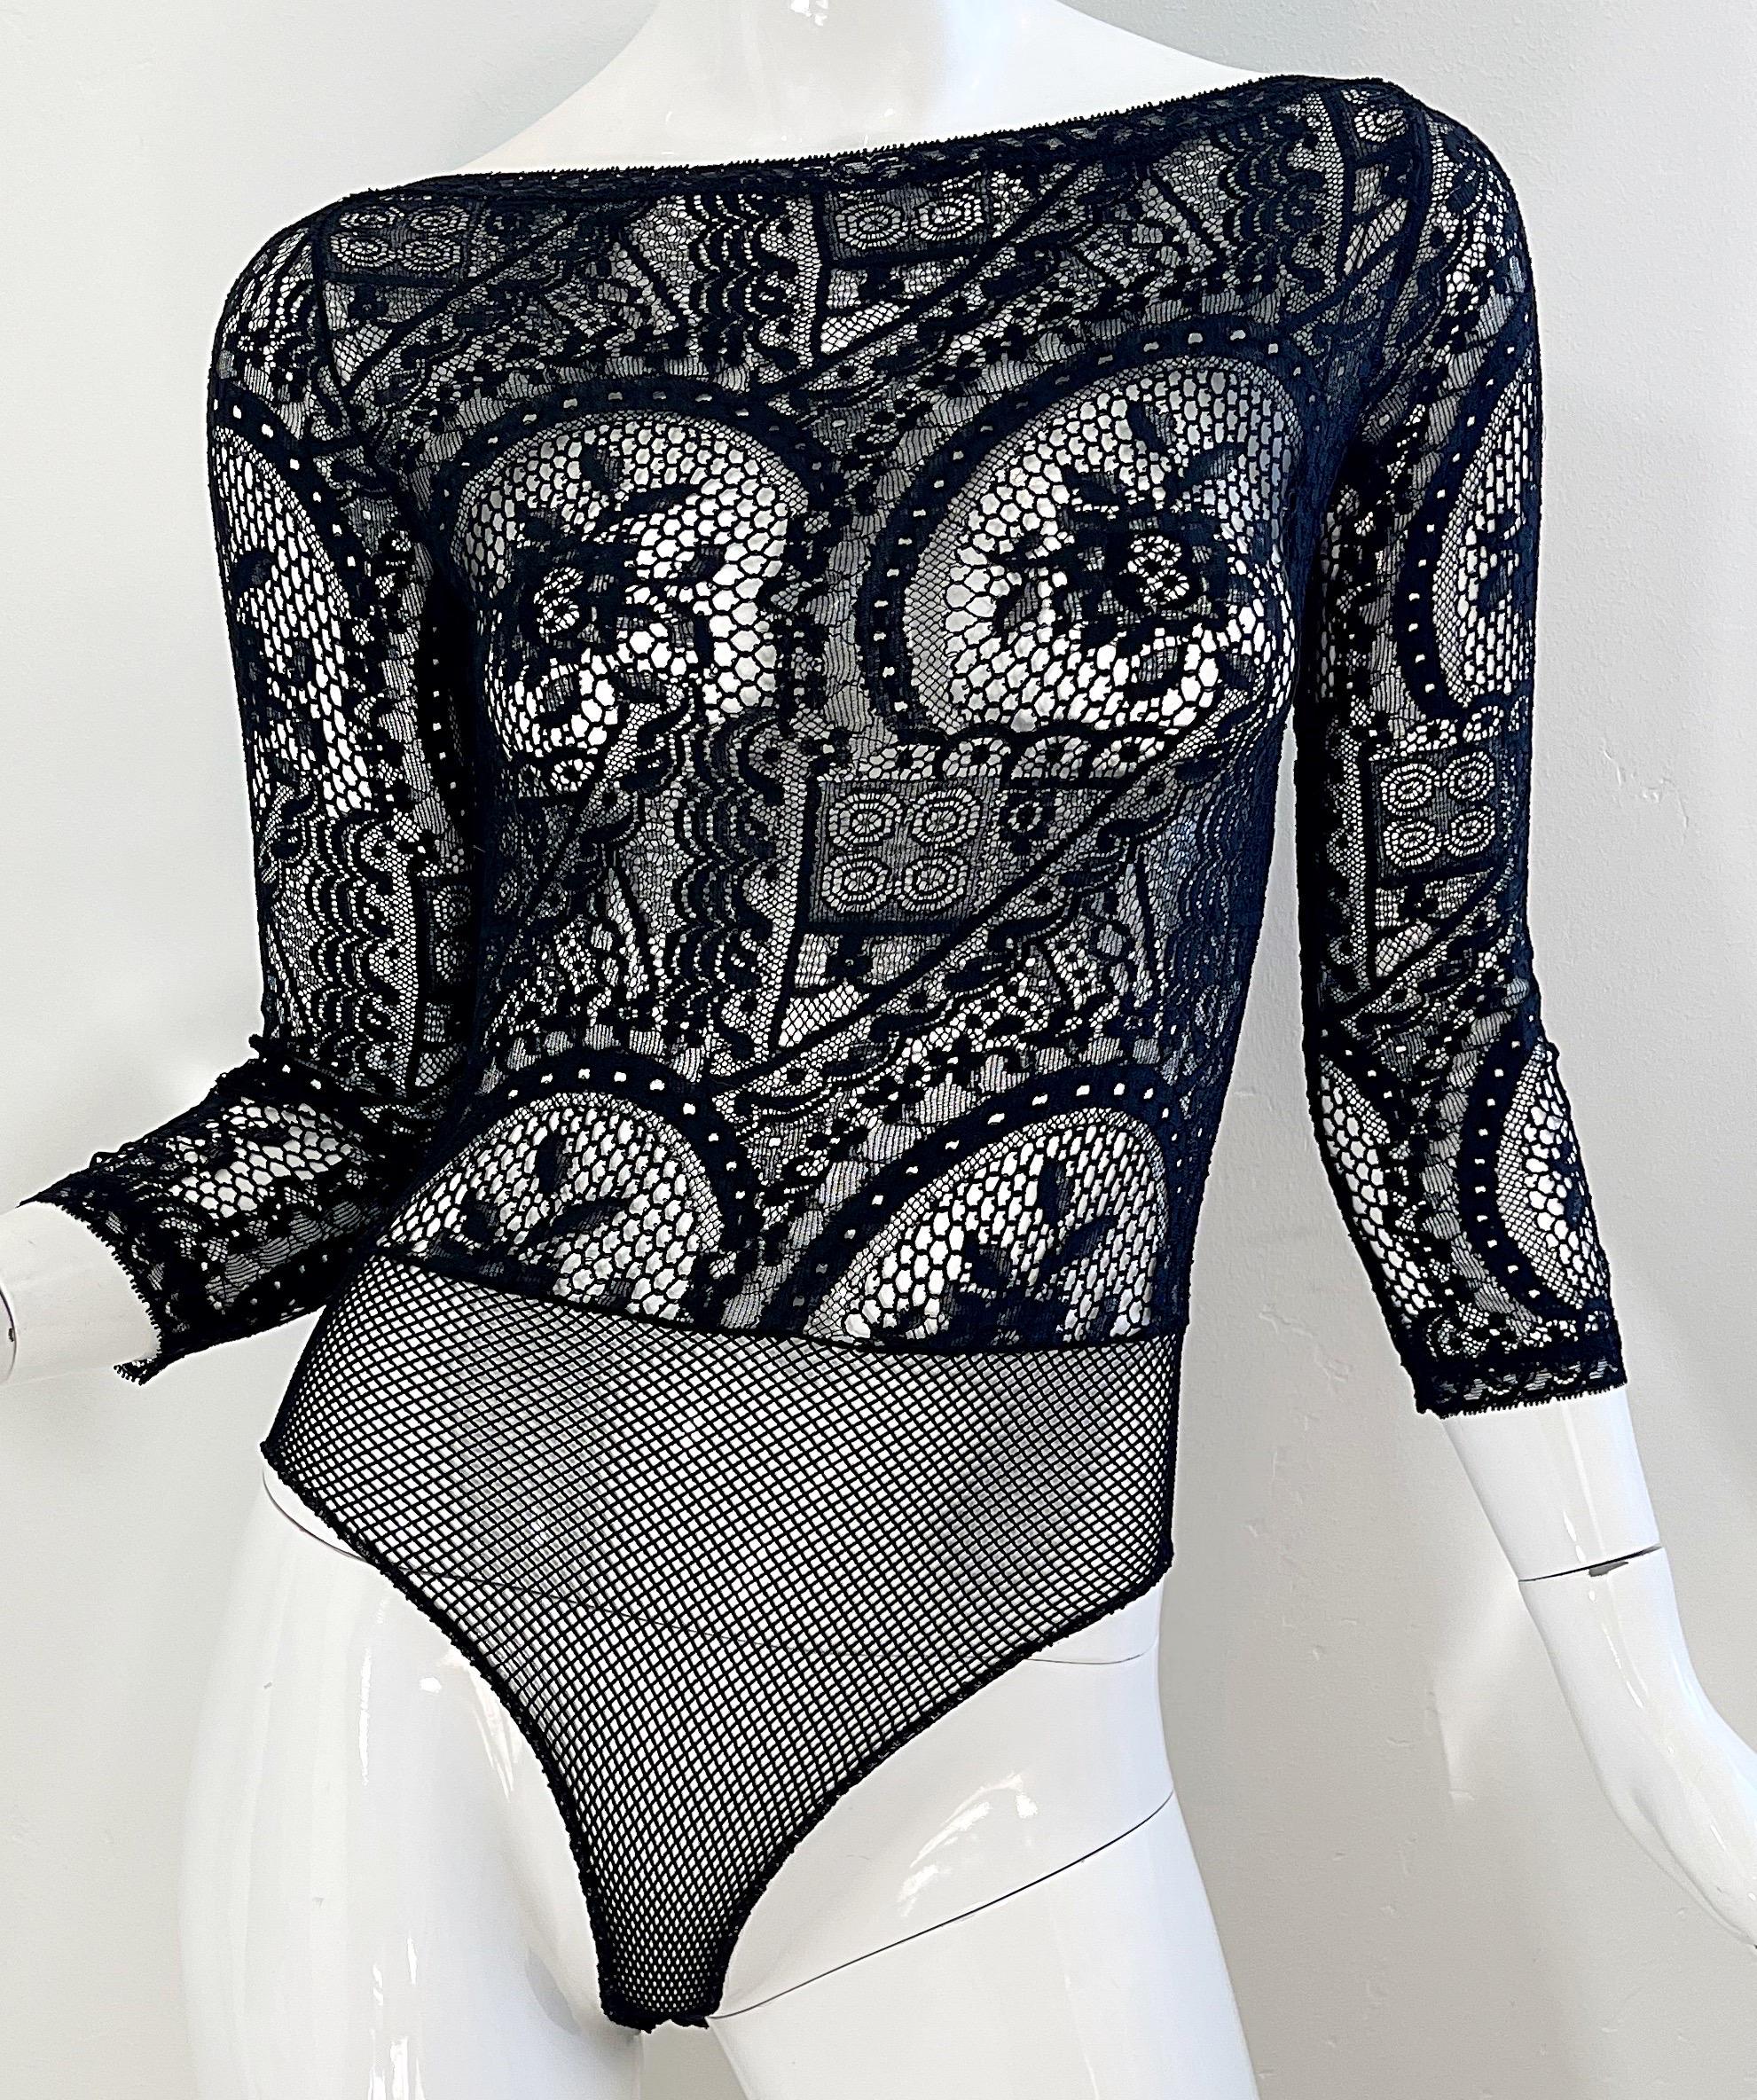 1980s Christian Lacroix Black Sheer Crochet Lace Vintage 80s One Piece Bodysuit In Excellent Condition For Sale In San Diego, CA